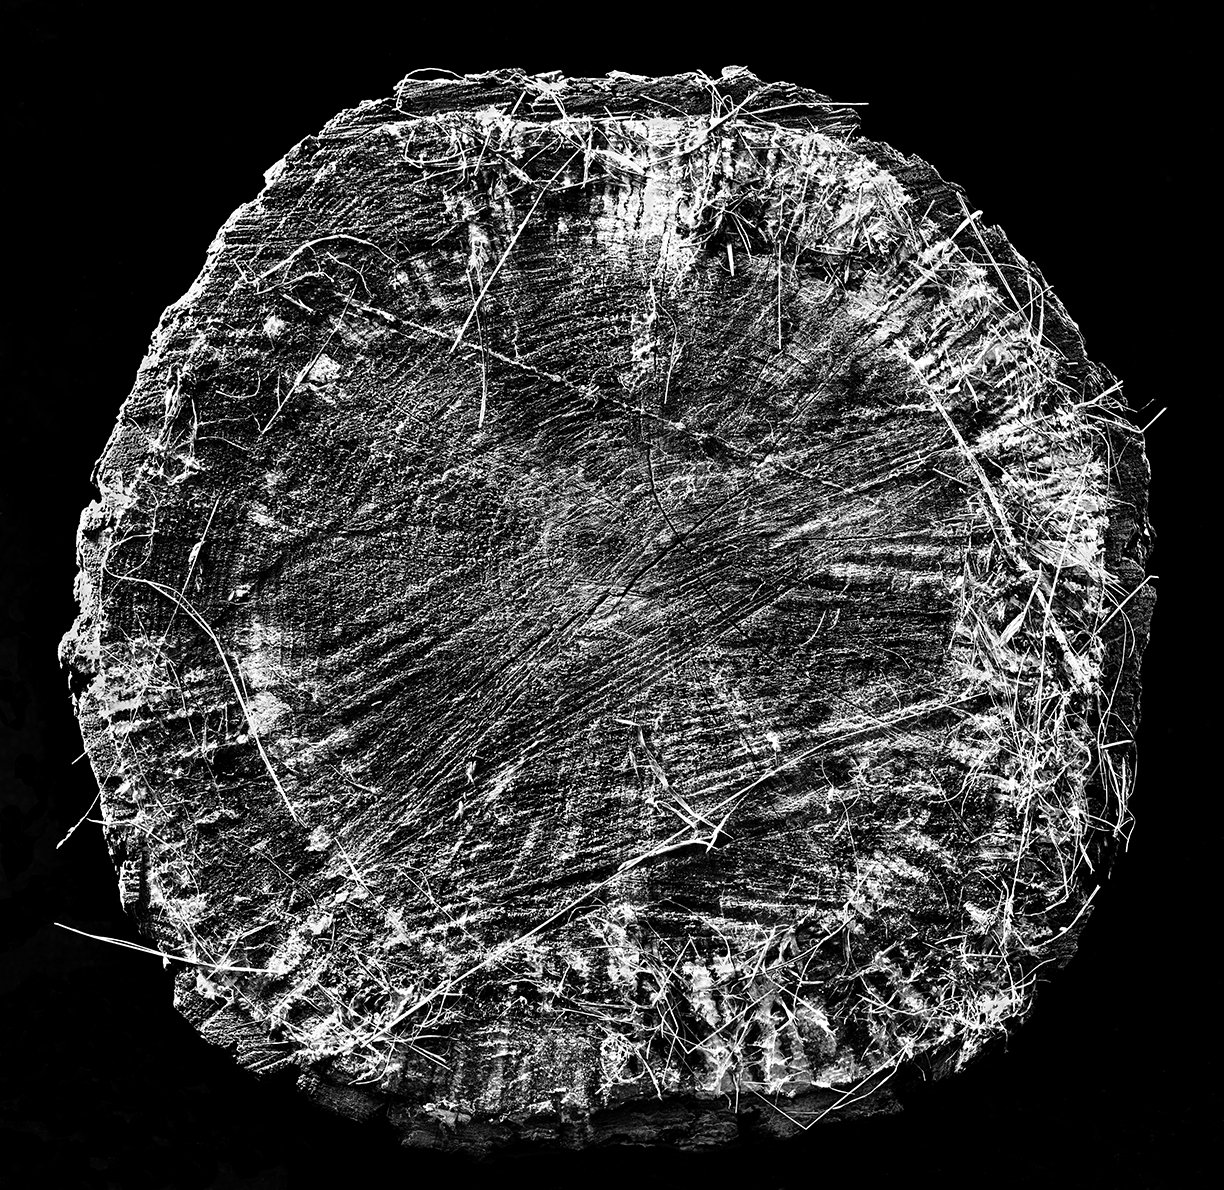    Wonders In The Woods    Heartwood: Disk With Field Grass  2015 85cm x 87.5cm Archival pigment print 